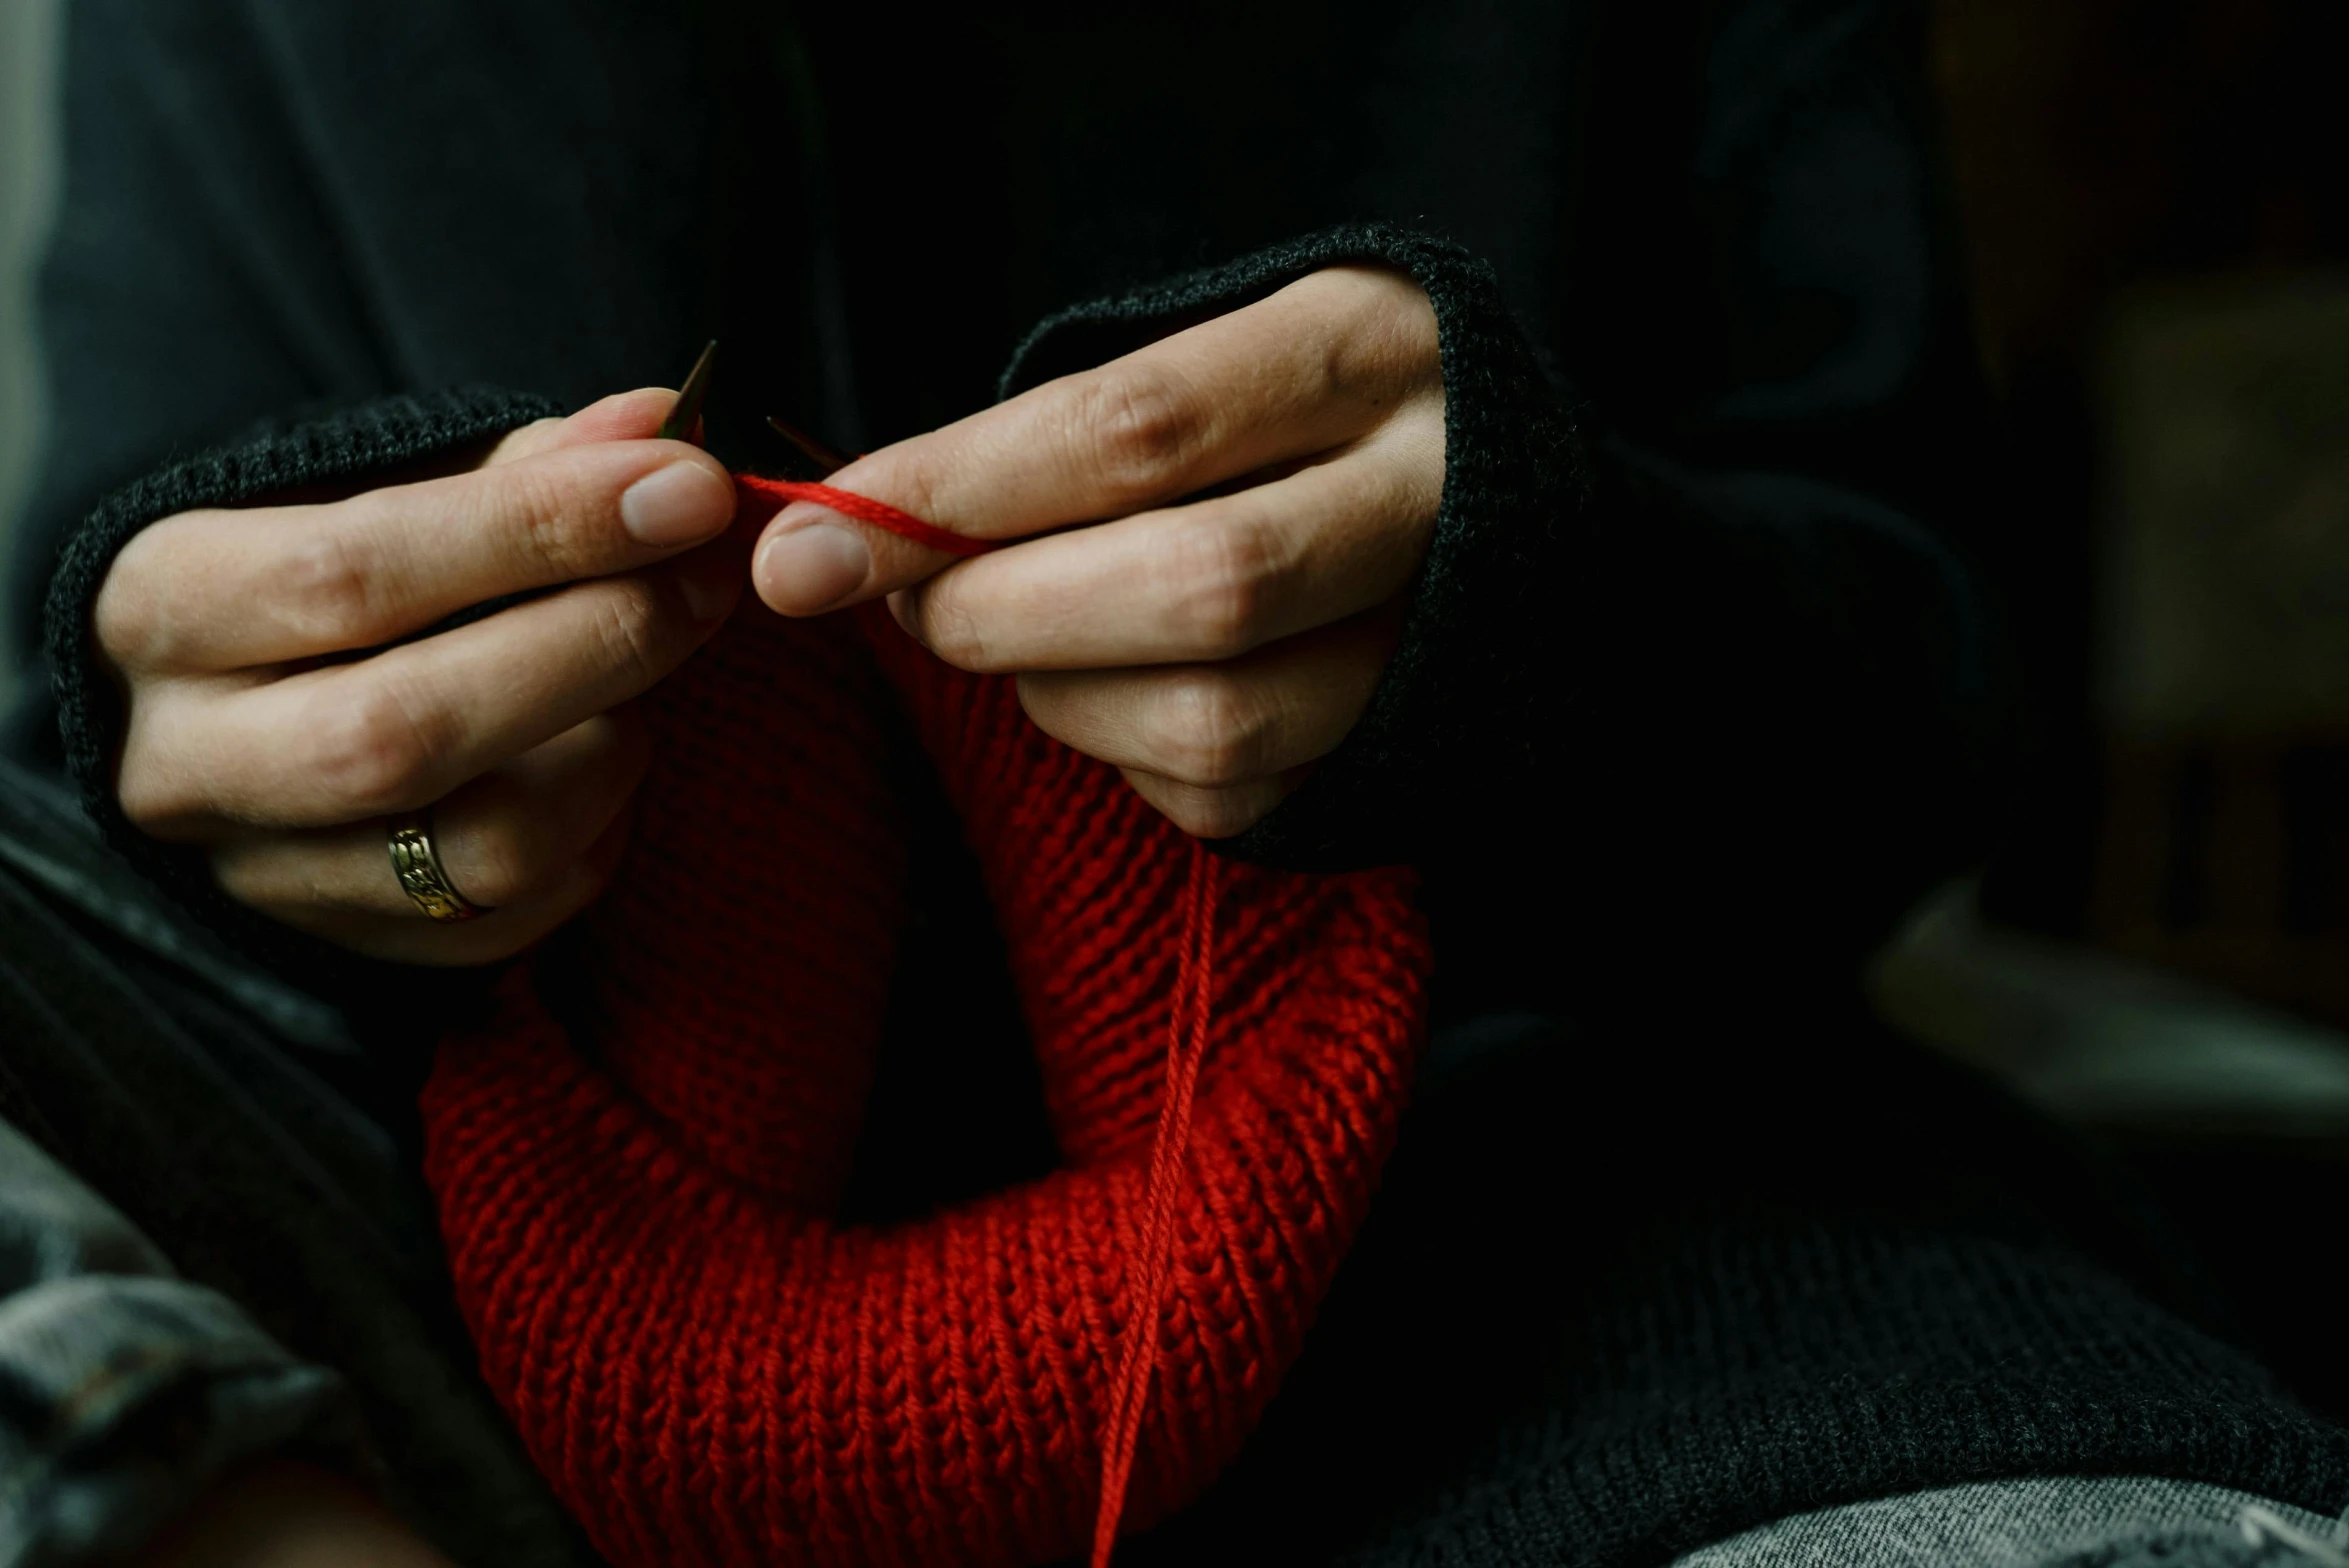 a woman knitting yarn on the end of her hand